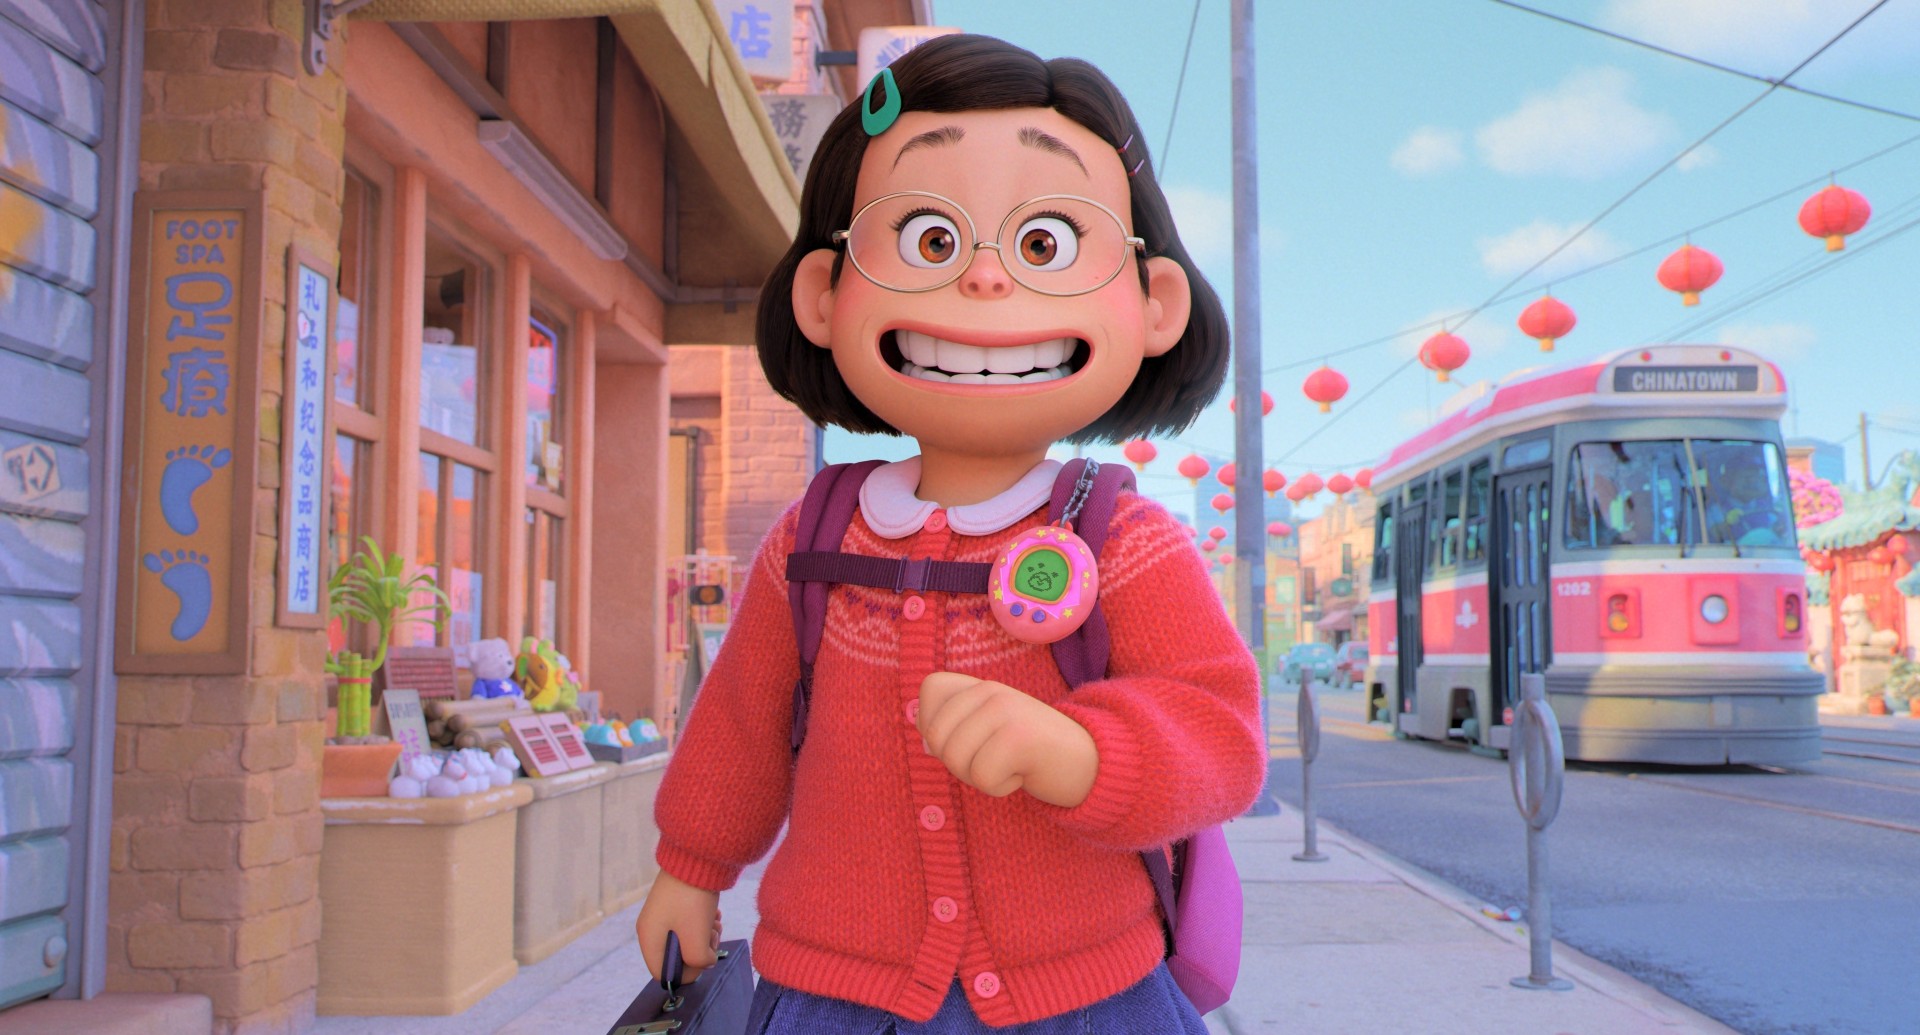 Mei walks down the street in a scene from "Turning Red."